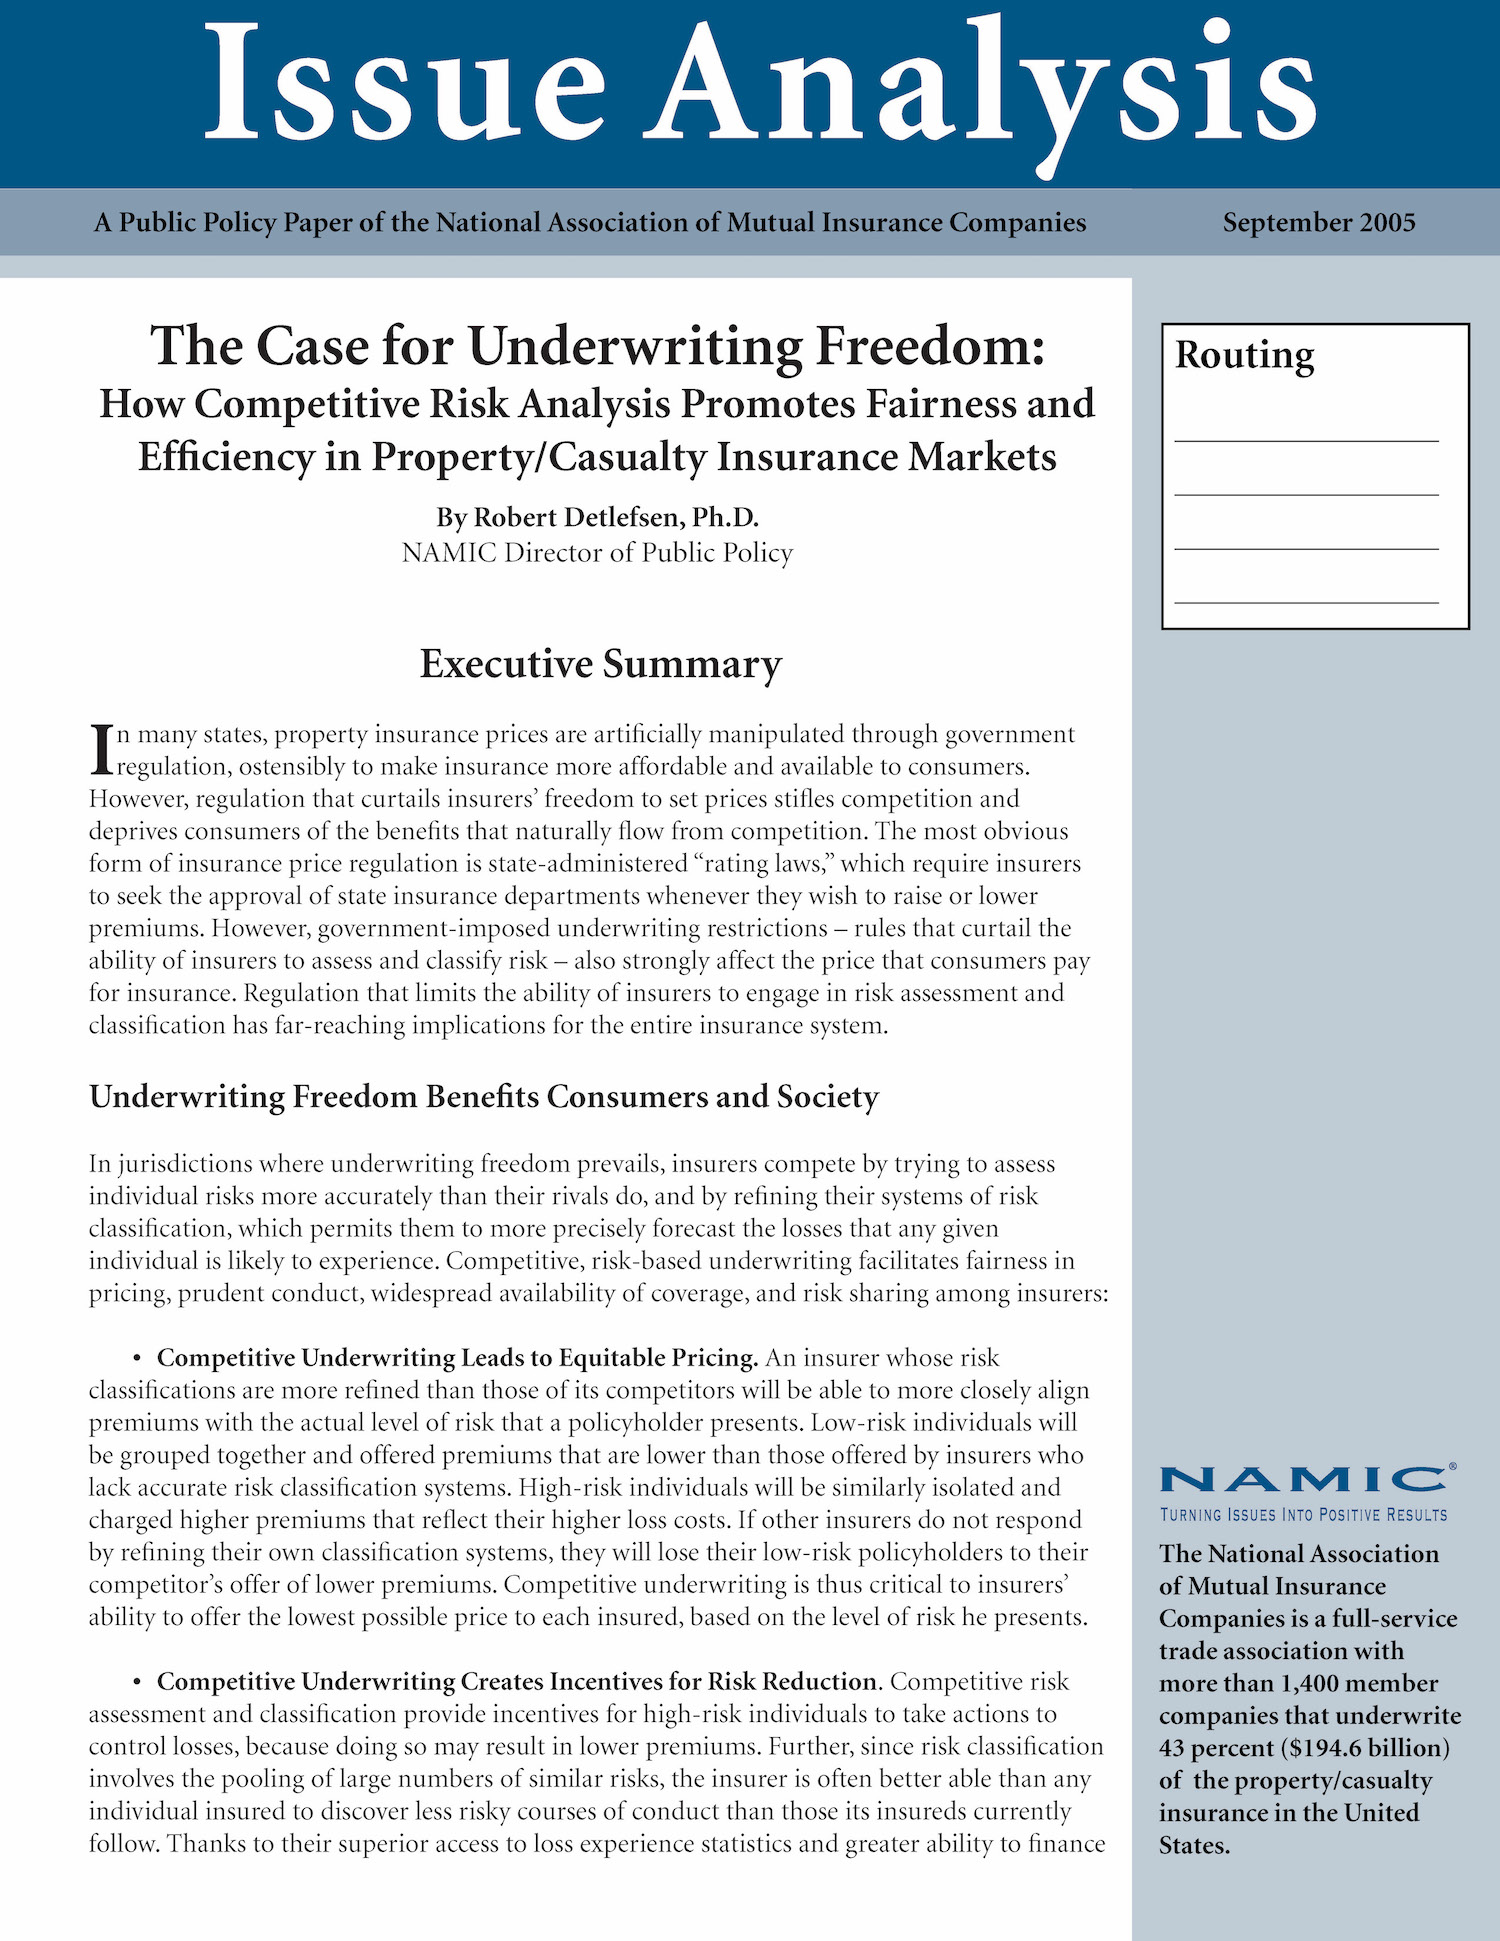 The Case for Underwriting Freedom: How Competitive Risk Analysis Promotes Fairness and Efficiency in Property/Casualty Insurance Markets PDF